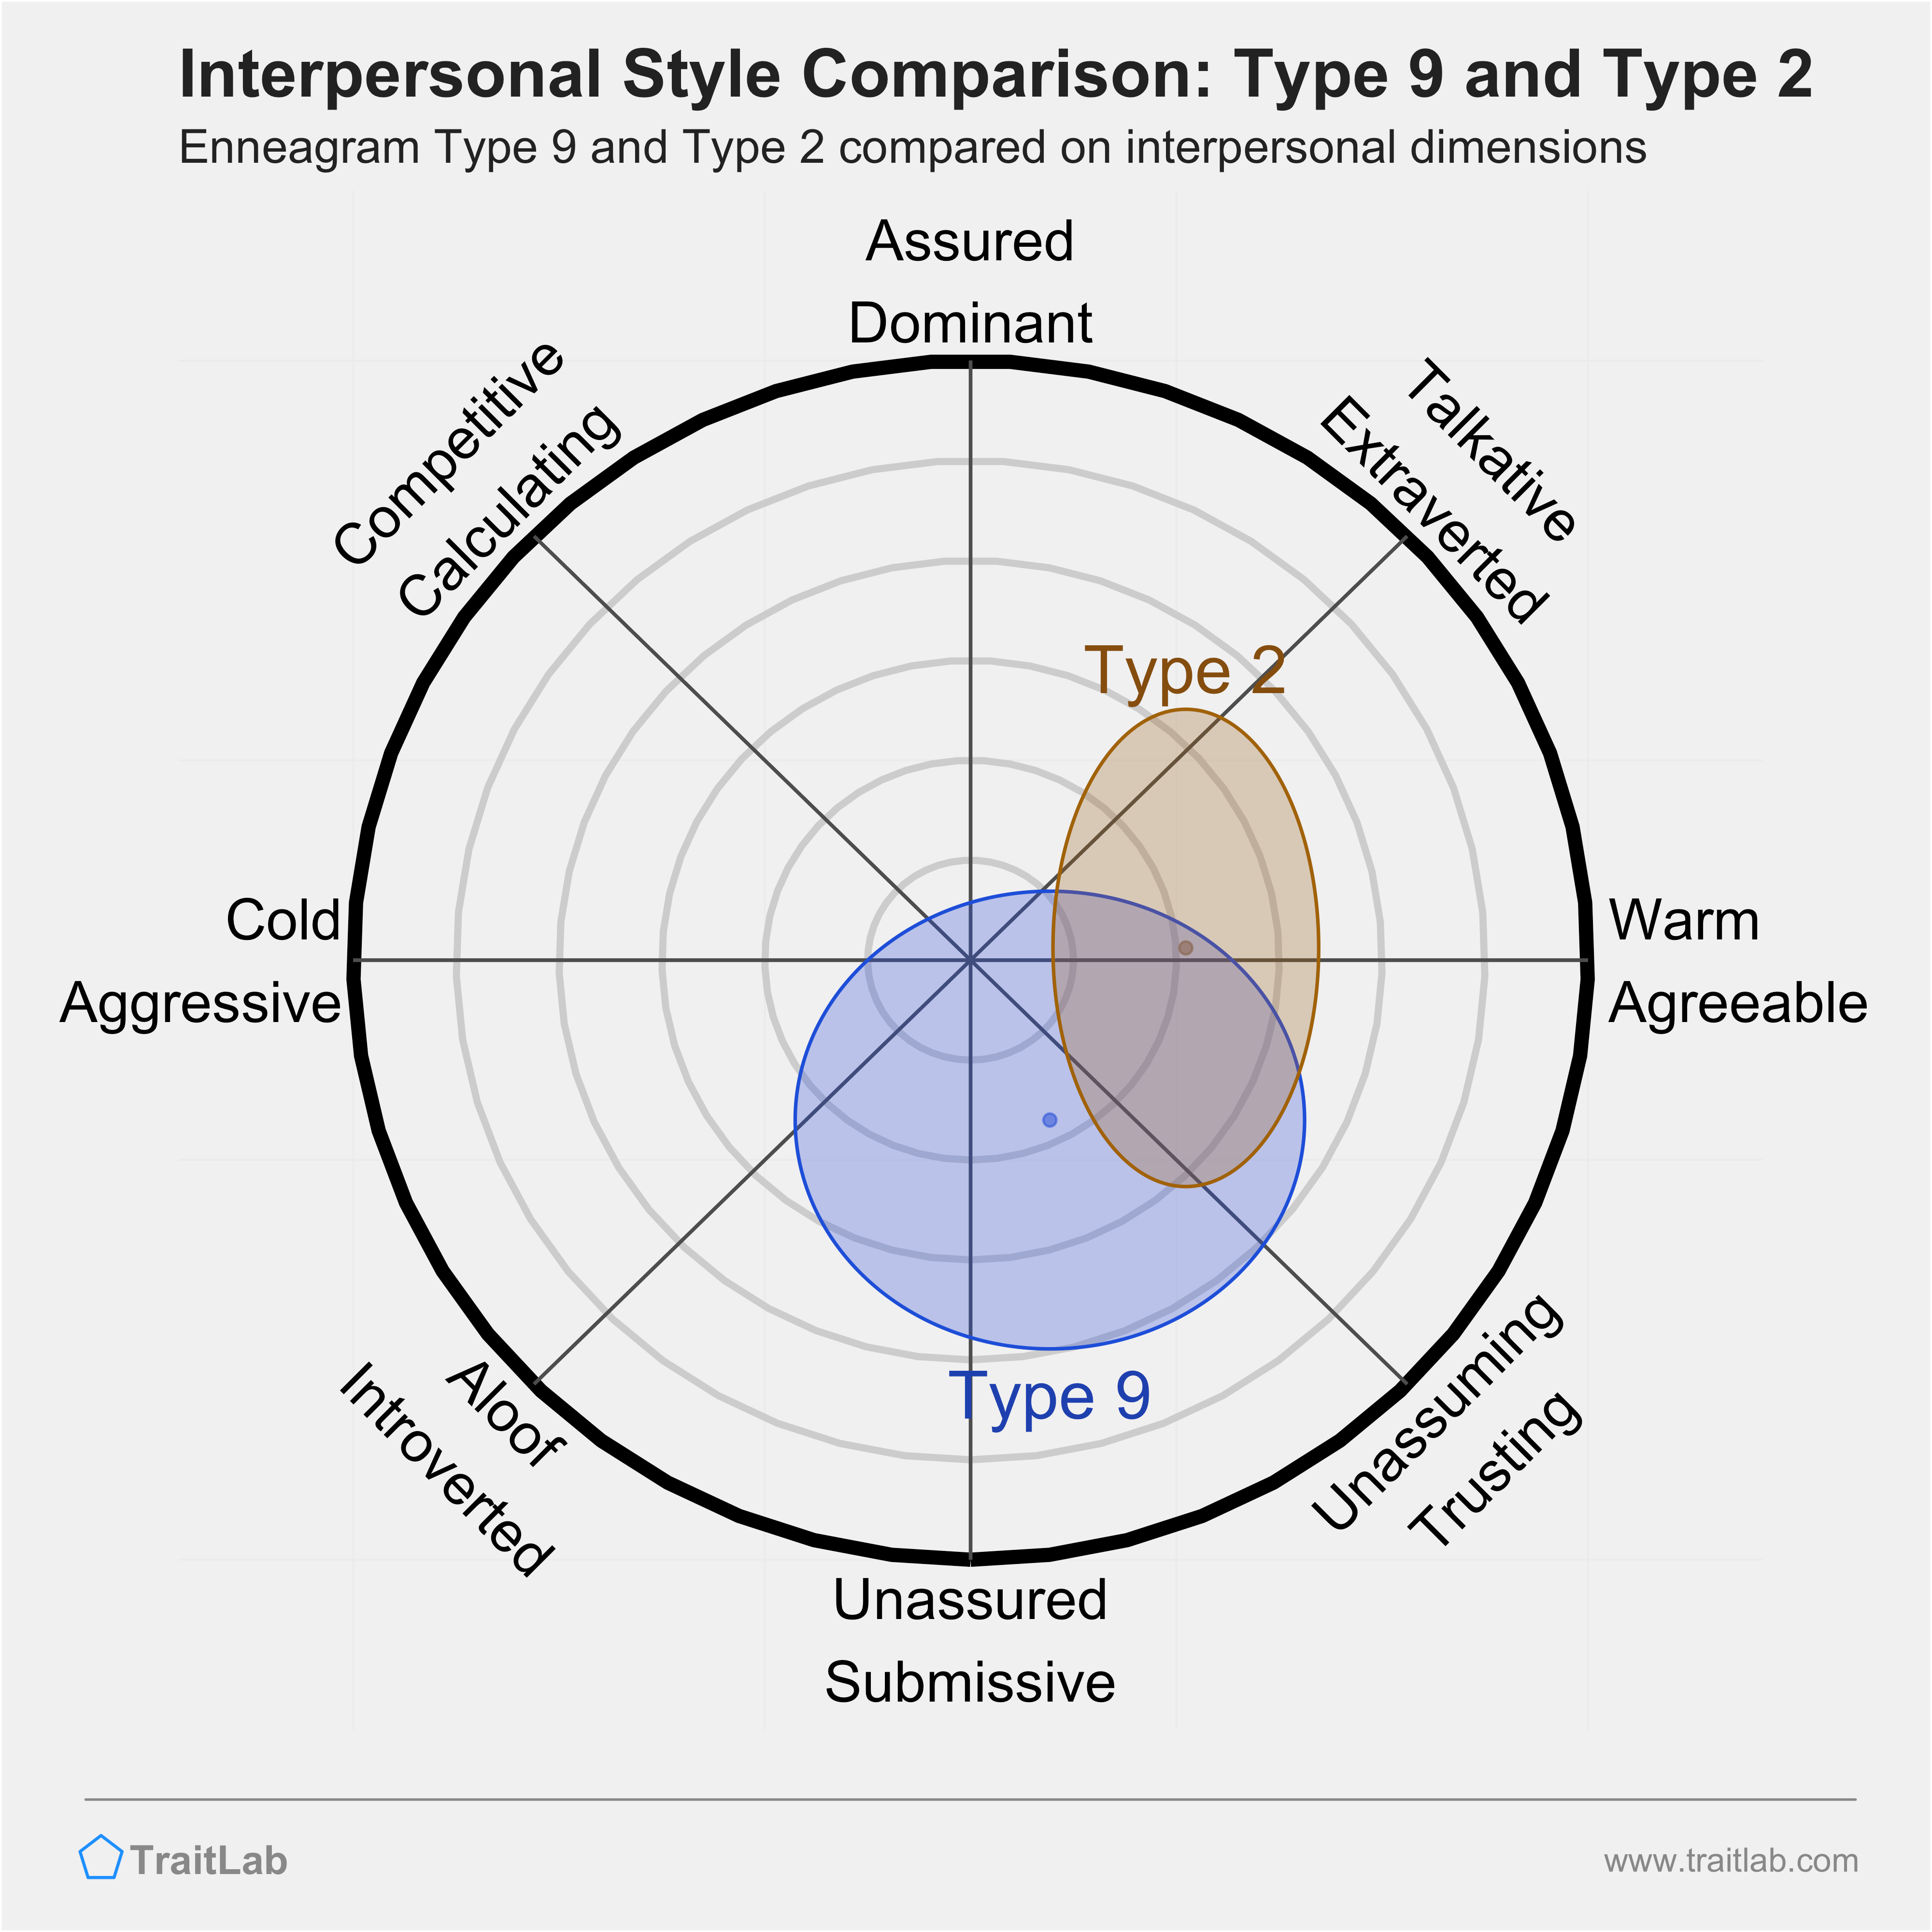 Enneagram Type 9 and Type 2 comparison across interpersonal dimensions